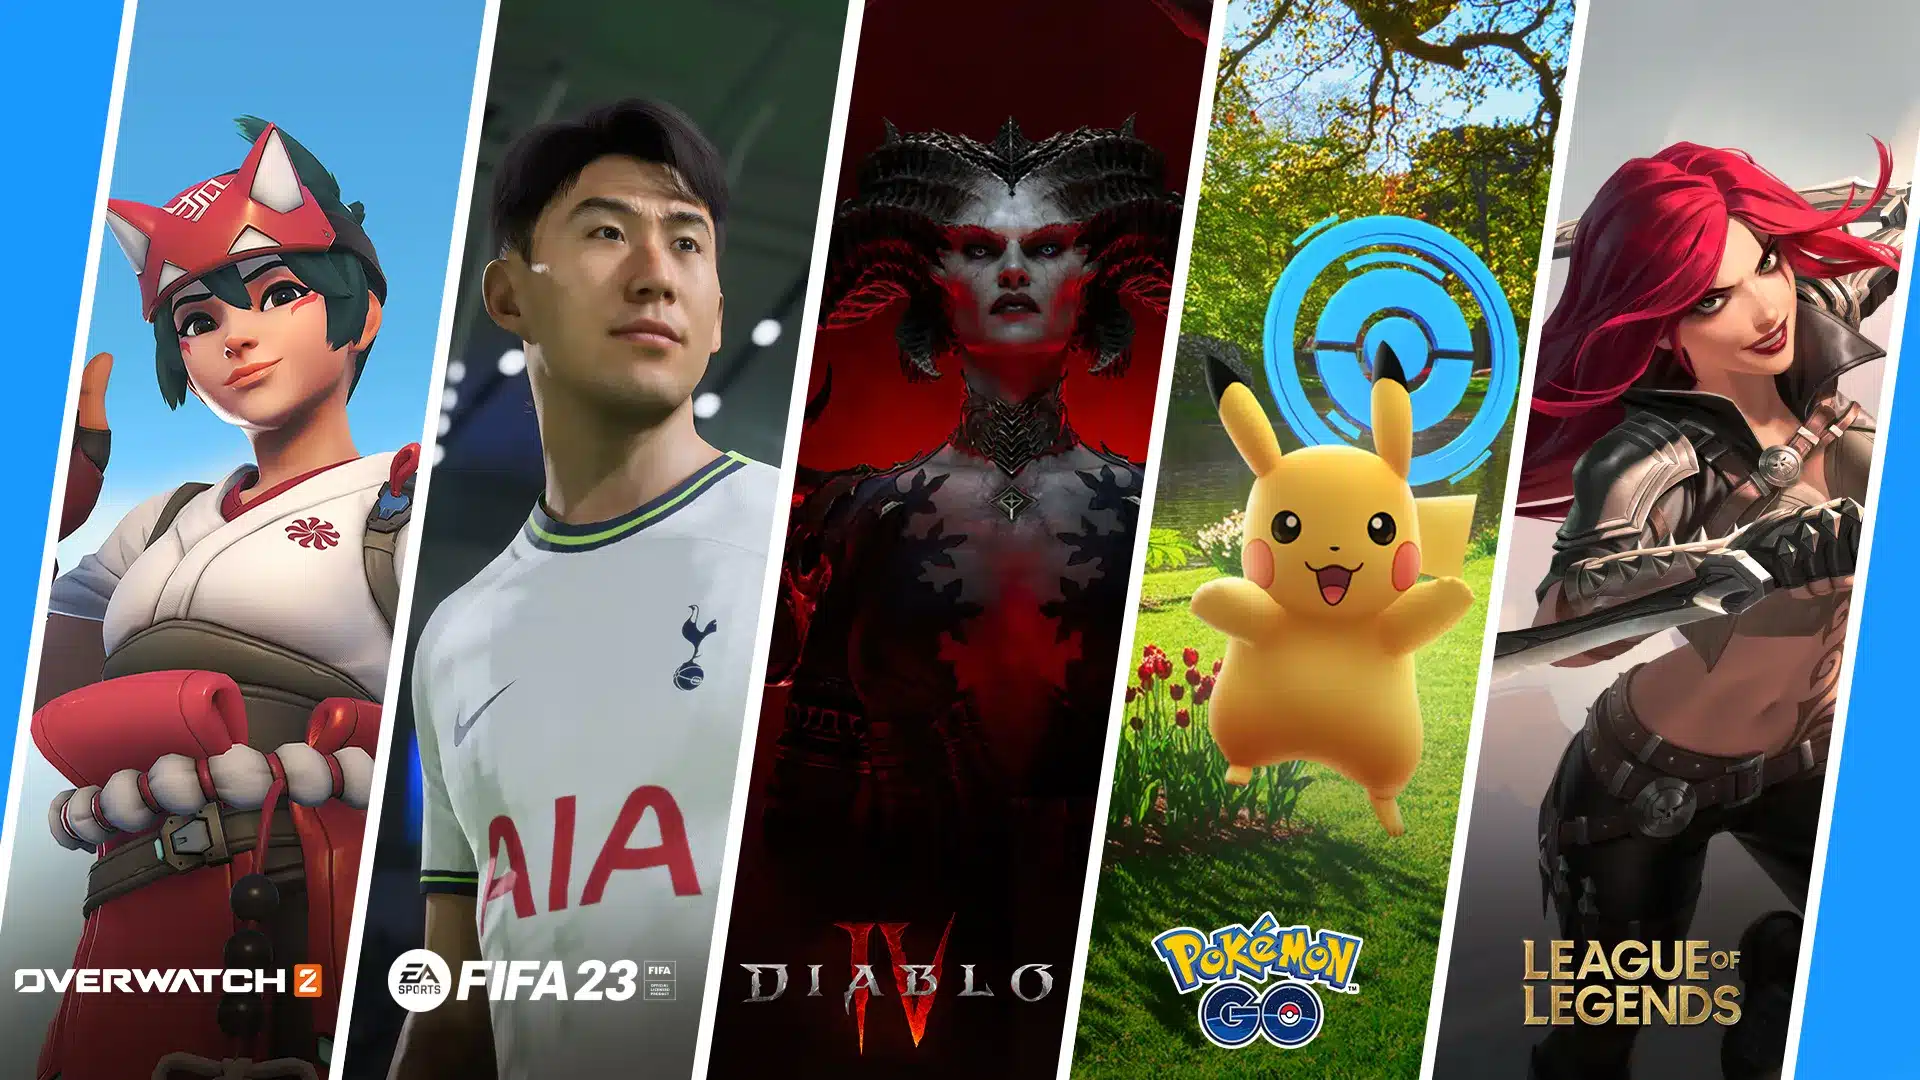 Explained: How To Get Prime Gaming Packs On FIFA 23